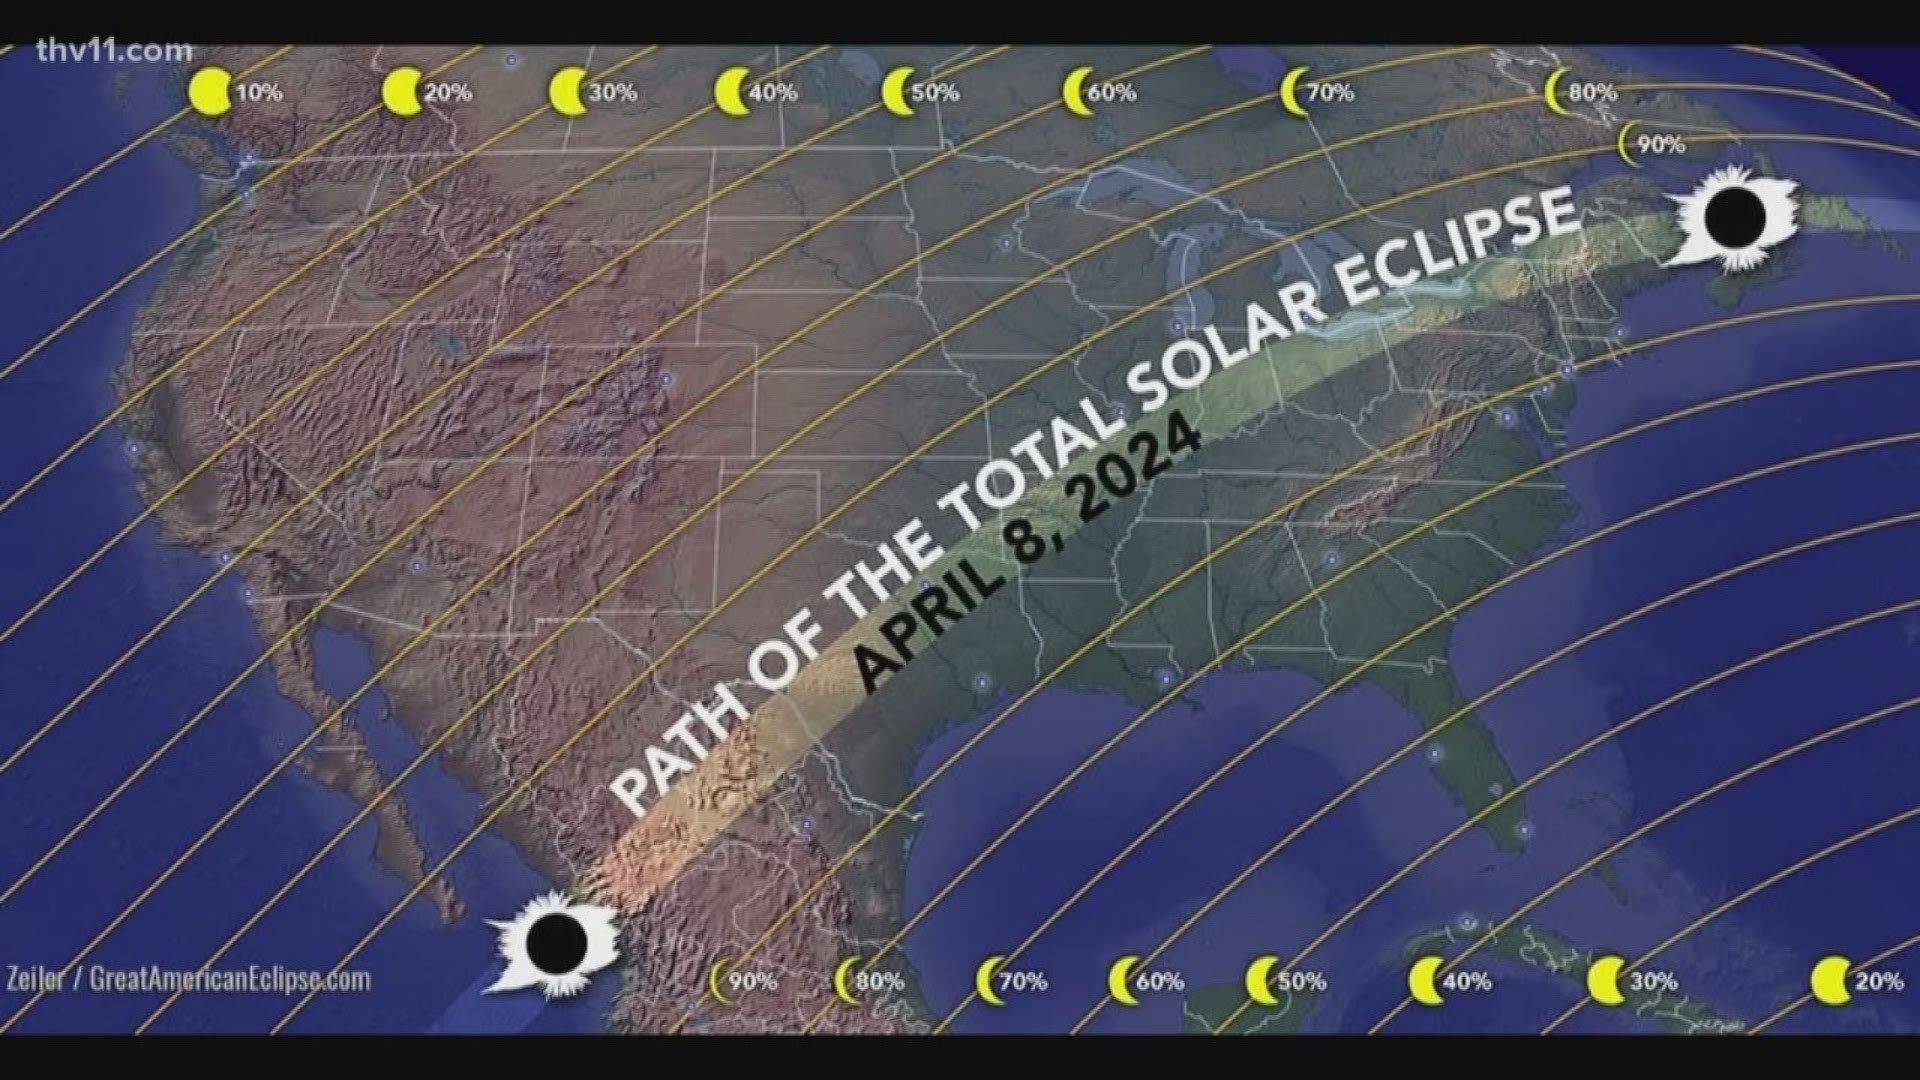 Solar eclipse on April 8, 2024 will stretch from Texas to Maine